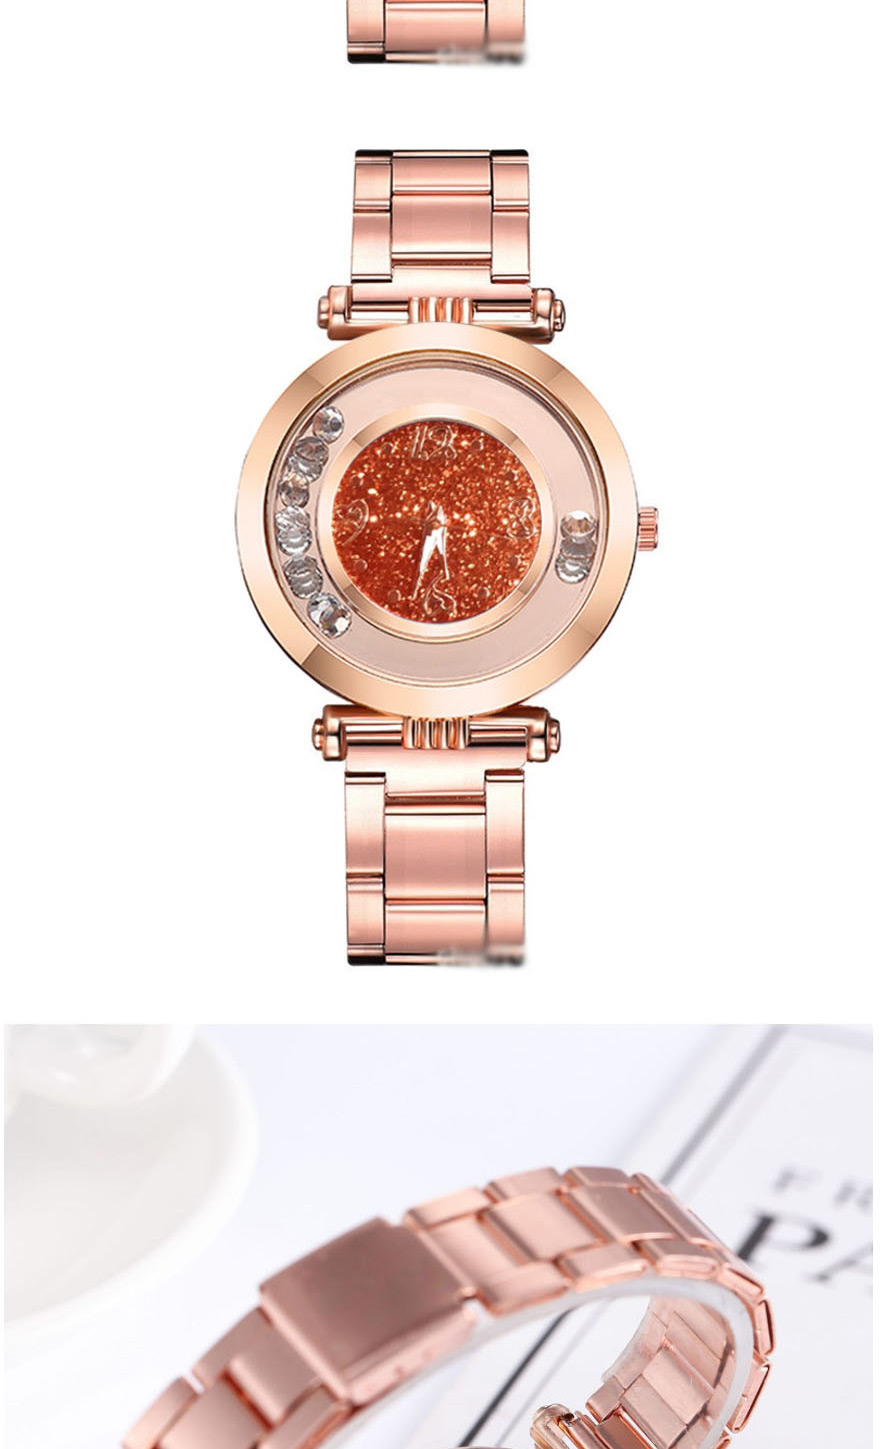 Fashion Red Quartz Watch With Diamonds And Glitter,Ladies Watches